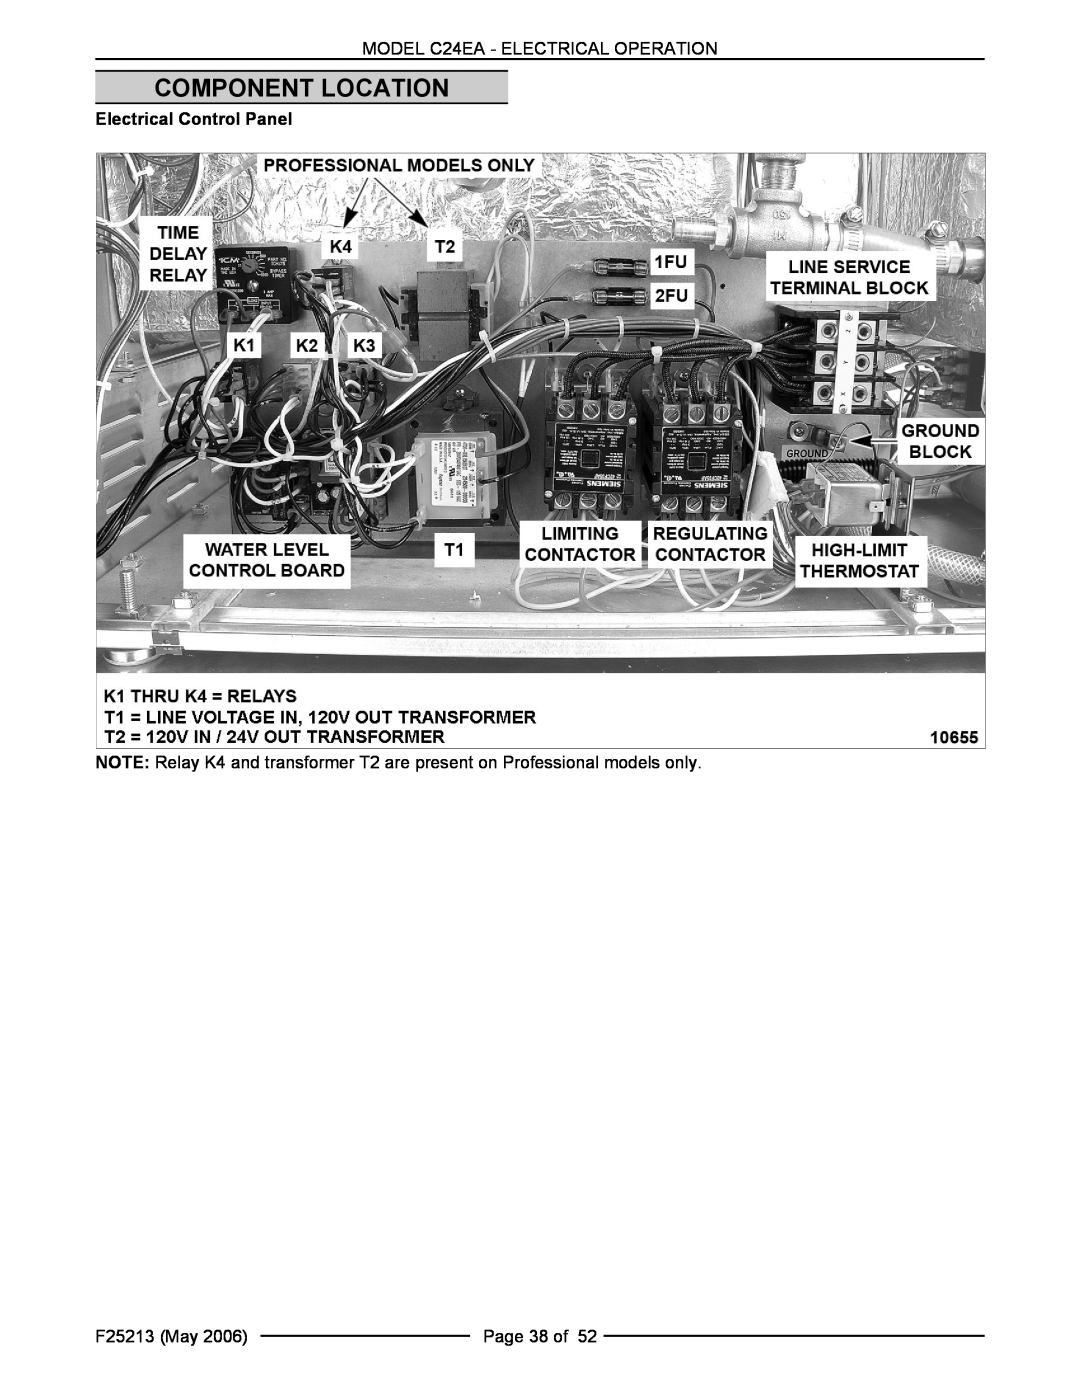 Vulcan-Hart C24EA3 480V BASIC, C24EA5 480V BASIC, C24EA5 480V PRO service manual Component Location, Electrical Control Panel 